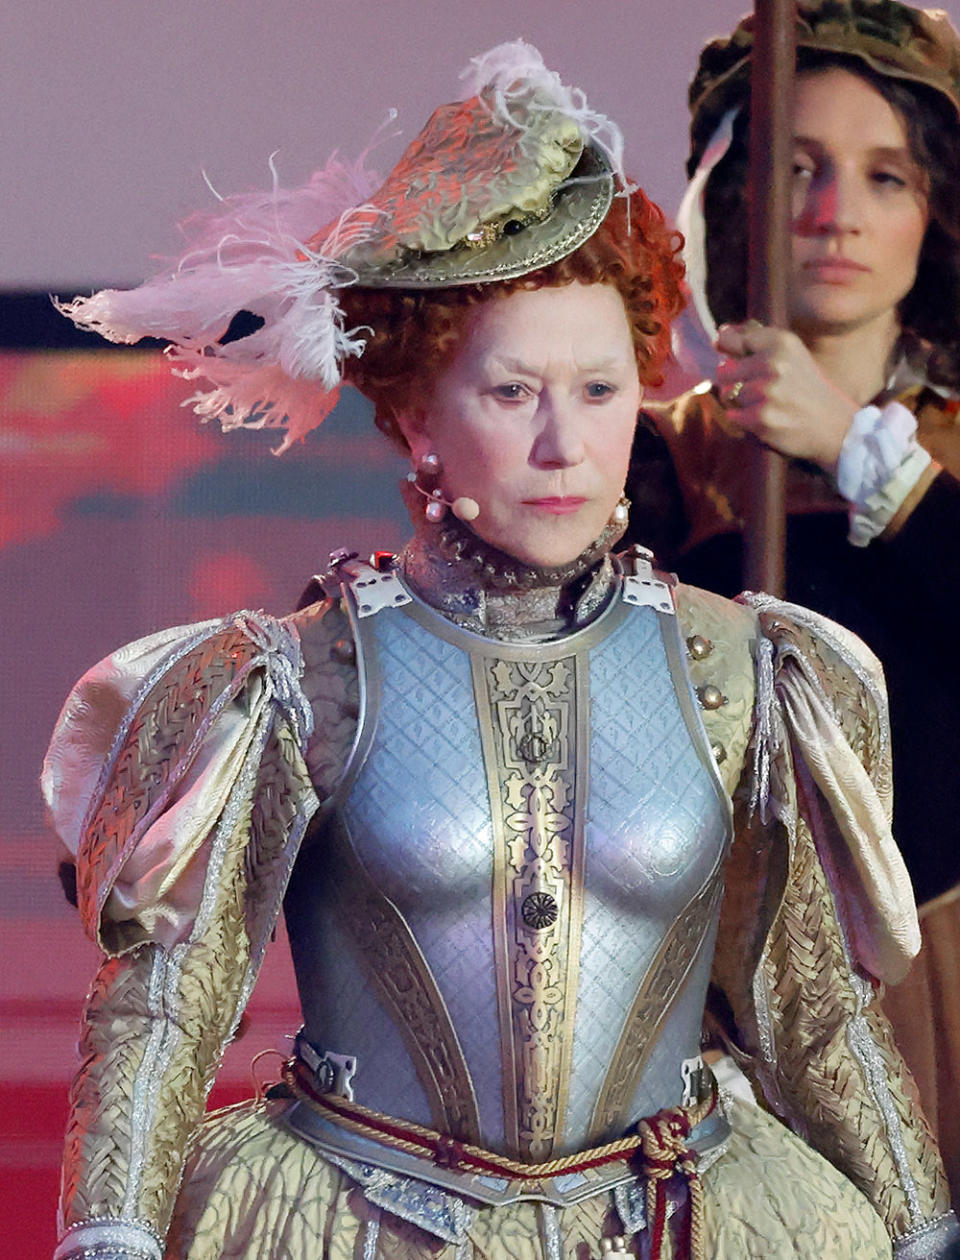 Dame Helen Mirren plays the role of Elizabeth I during 'A Gallop Through History' performance, part of the official celebrations for Queen Elizabeth II's Platinum Jubilee during the Royal Windsor Horse Show at Home Park, Windsor Castle on May 15, 2022 in Windsor, England.